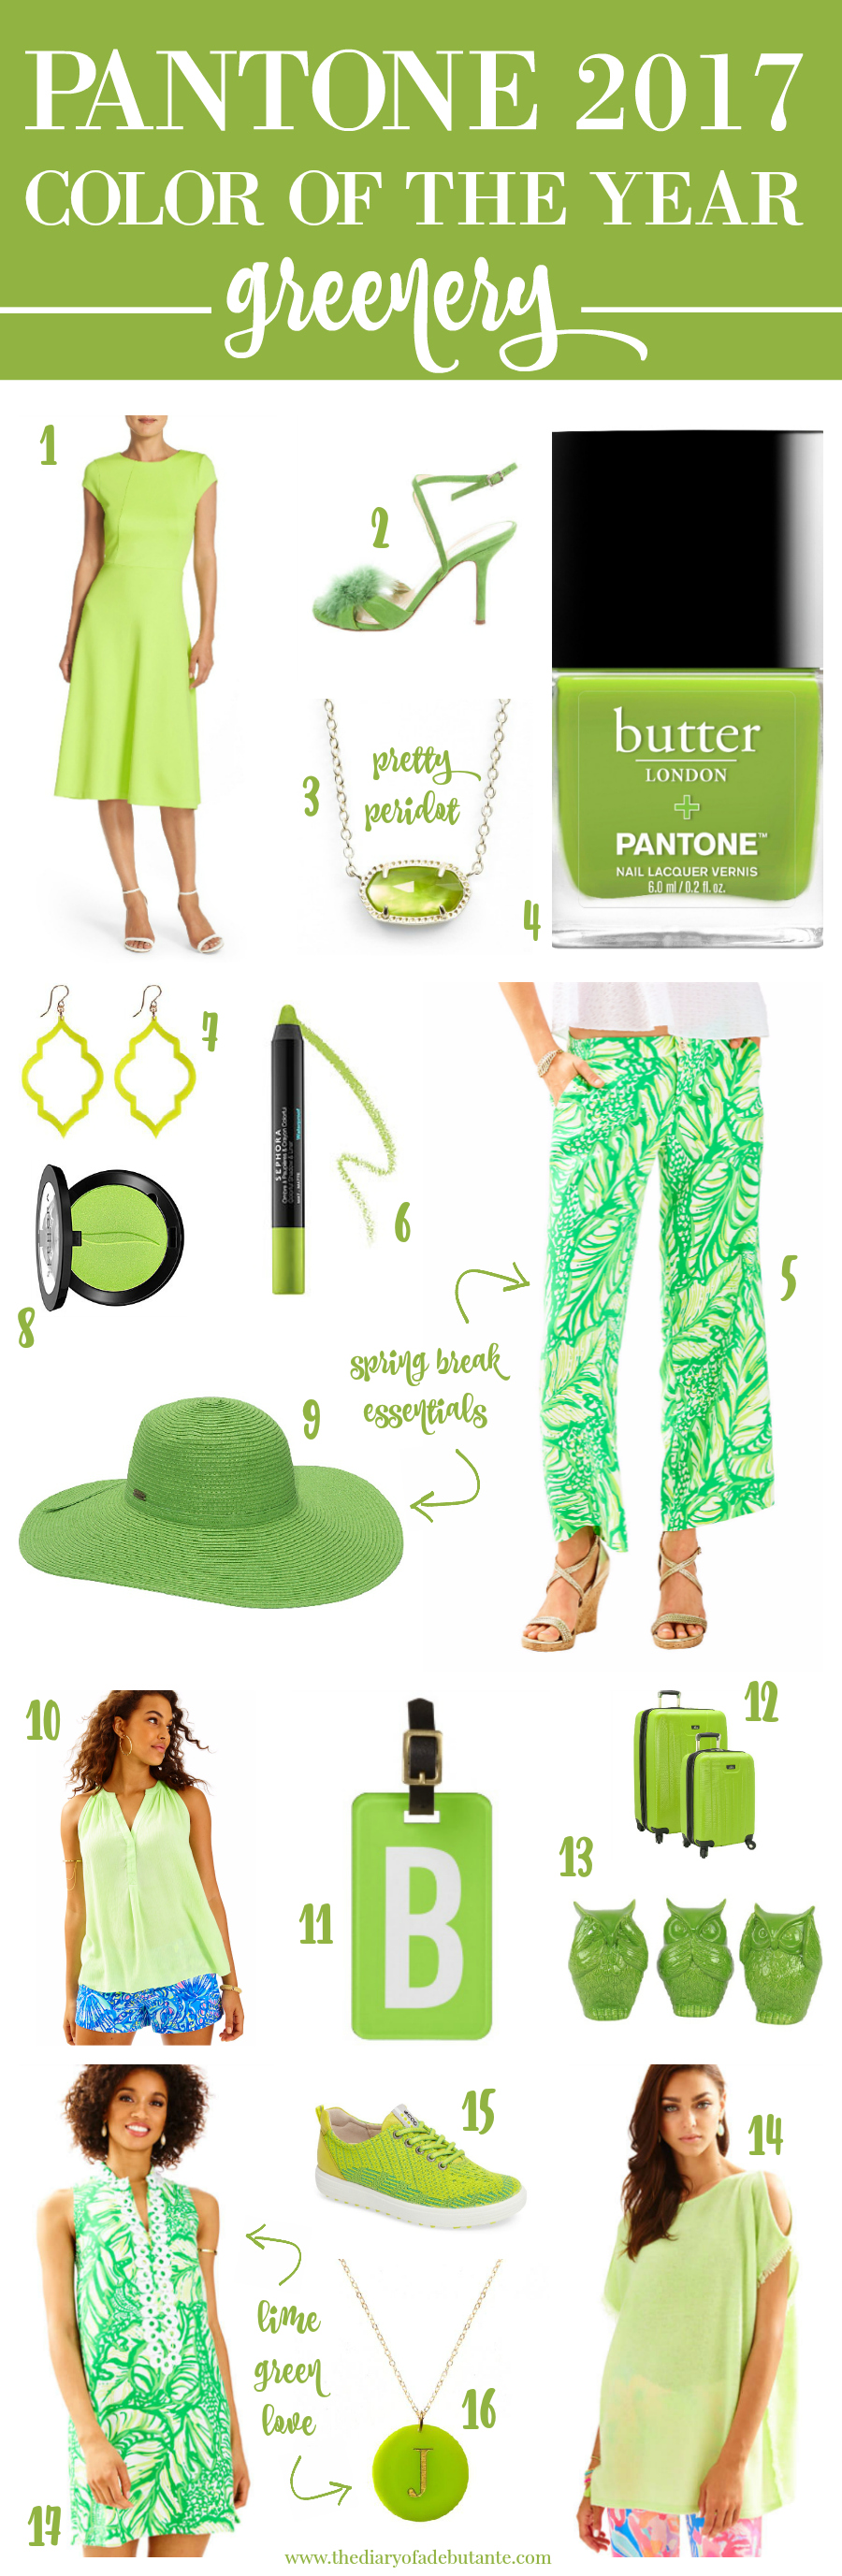 How to wear Pantone greenery clothing and accessories